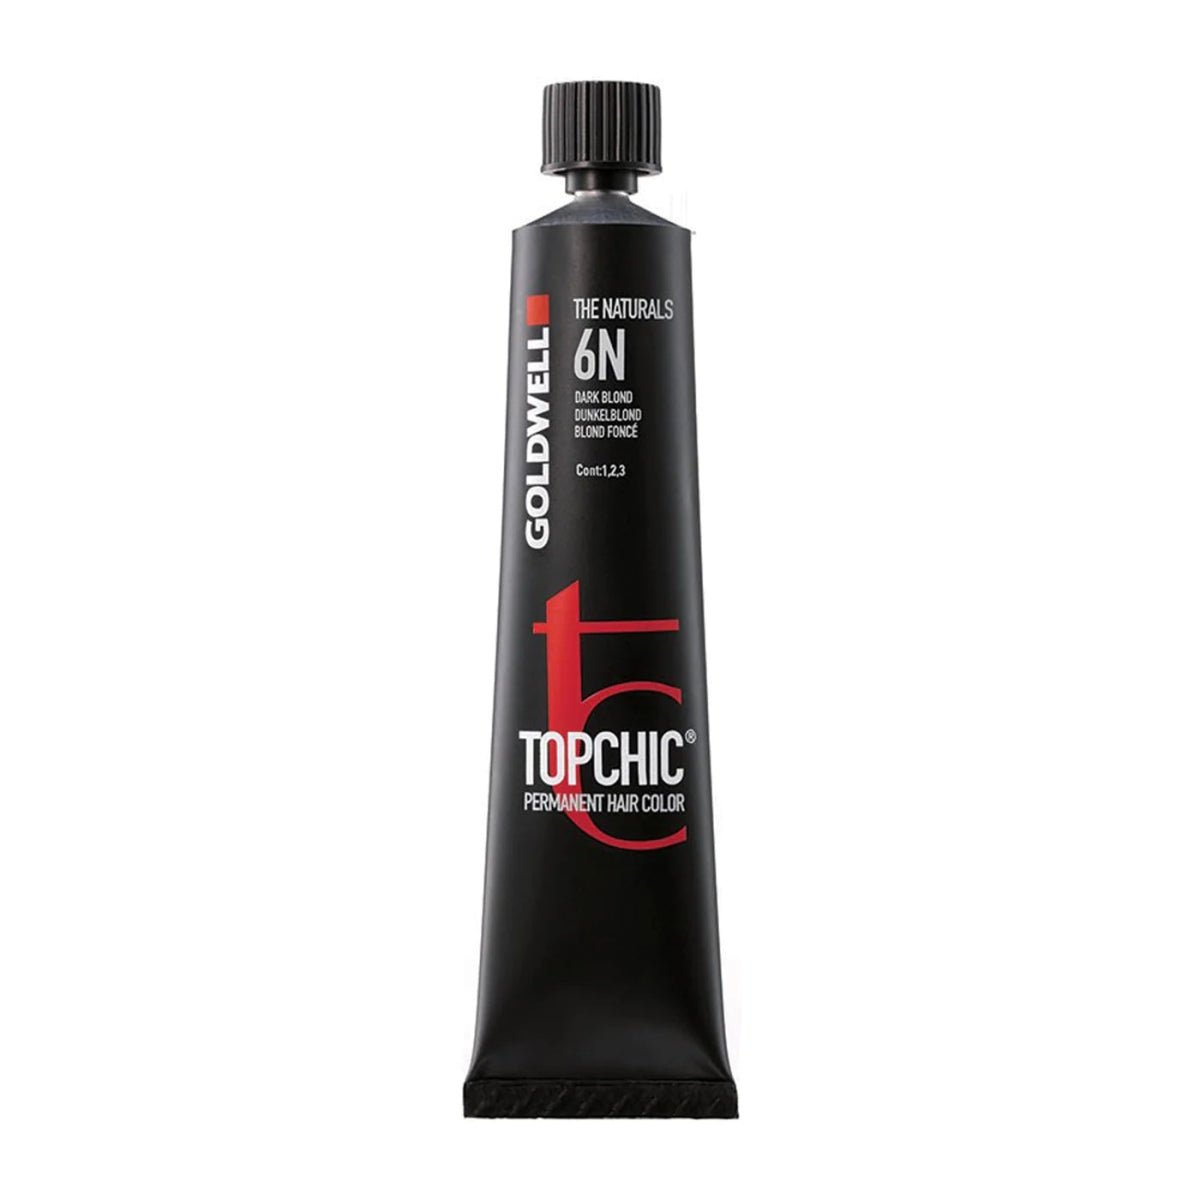 Goldwell Topchic Tube 60ml - MORE COLOURS - Southwestsix Cosmetics Goldwell Topchic Tube 60ml - MORE COLOURS - Hair Dyes Goldwell Southwestsix Cosmetics 9N Goldwell Topchic Tube 60ml - MORE COLOURS -